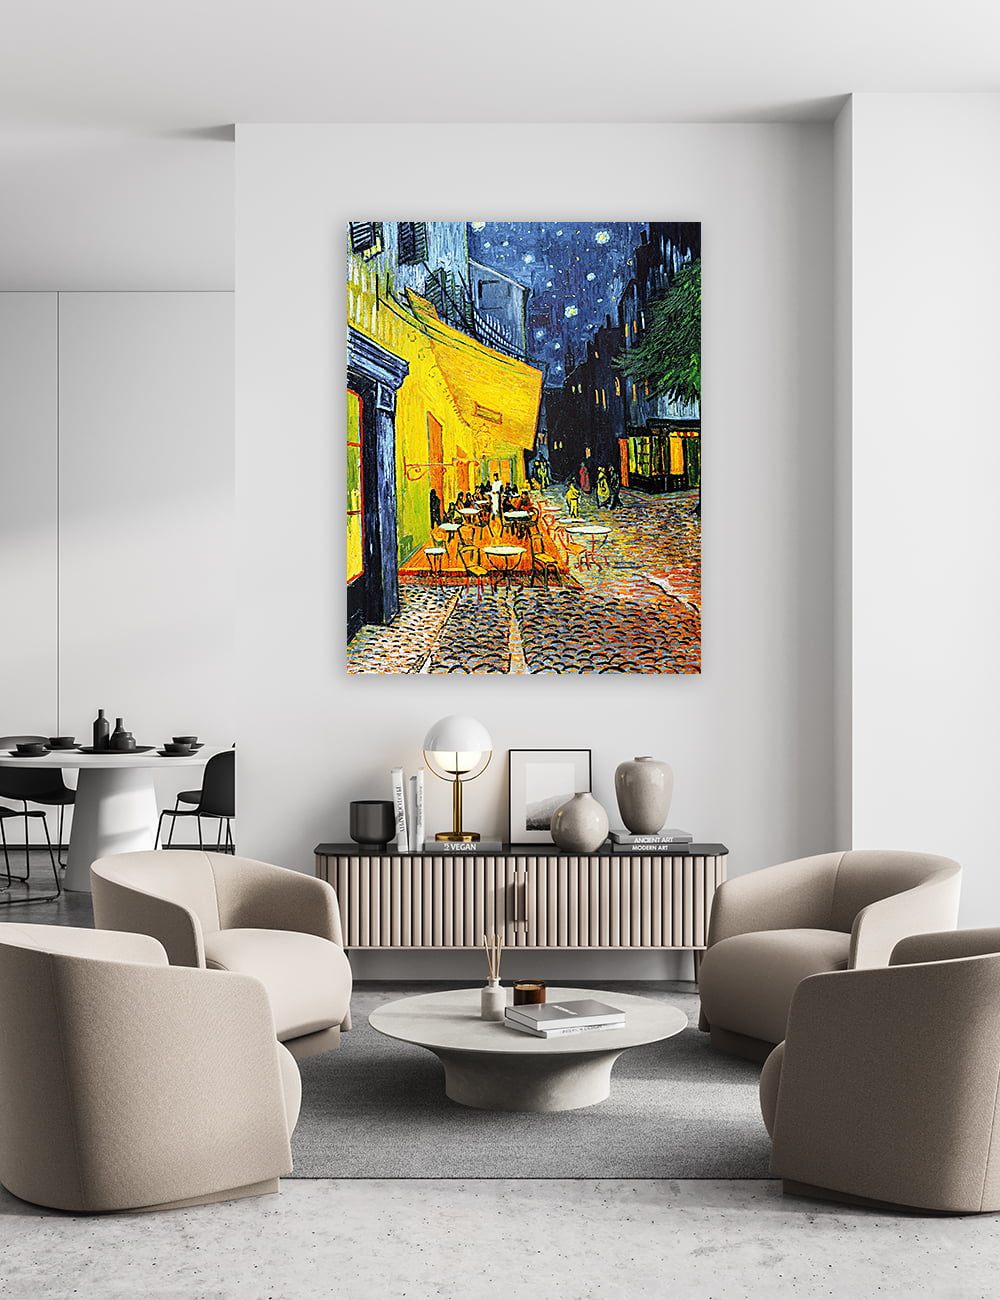 DECORARTS Cafe Terrace At Night by Vincent Van Gogh Art Reproduction. Giclee  Prints Acid Free Cotton Canvas Wall Art for Home Decor W 32